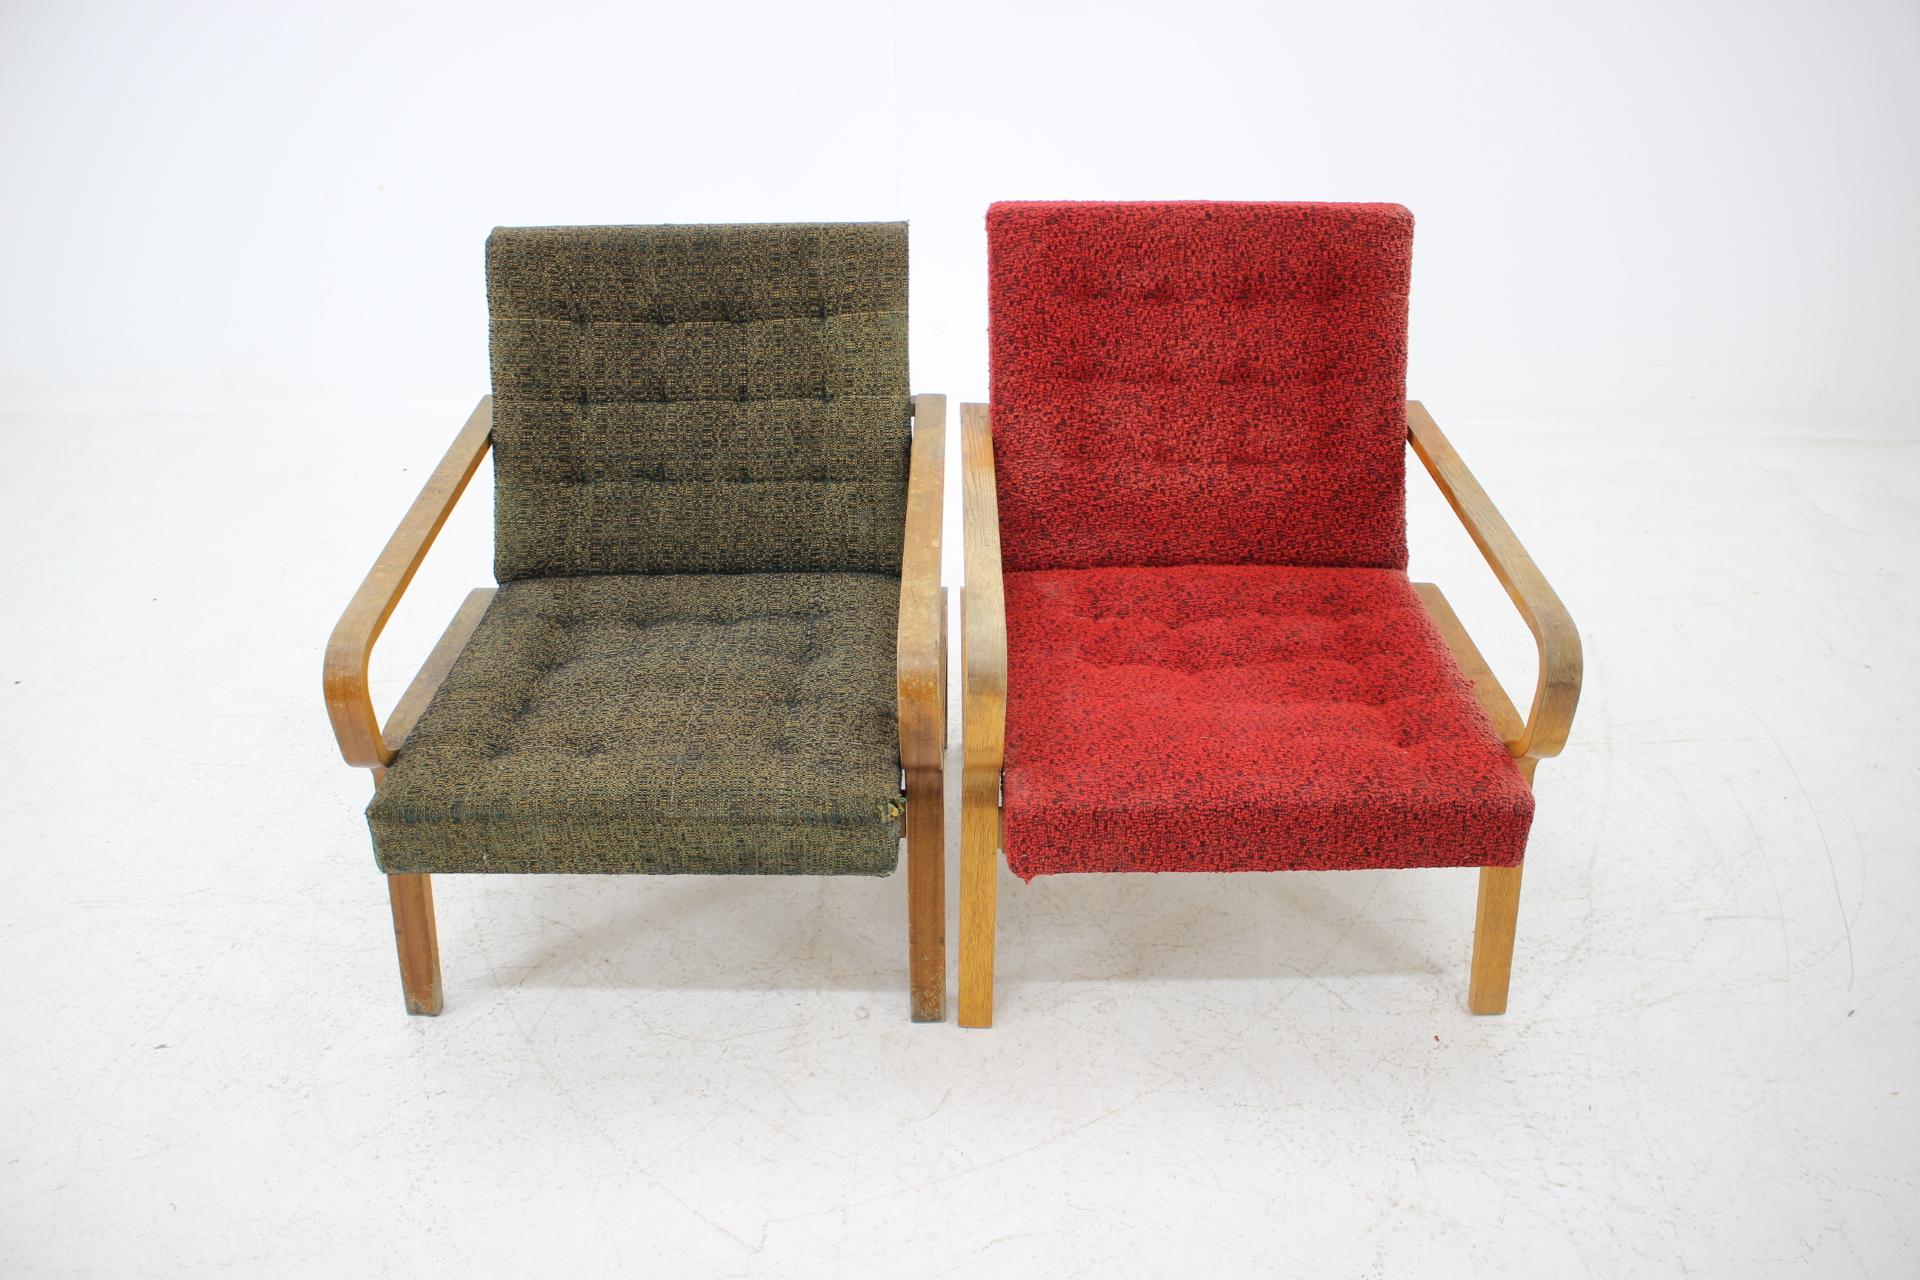 - Made in Czechoslovakia
- Made of wood, fabric
- Original upholstery has some signs use
- Original condition.